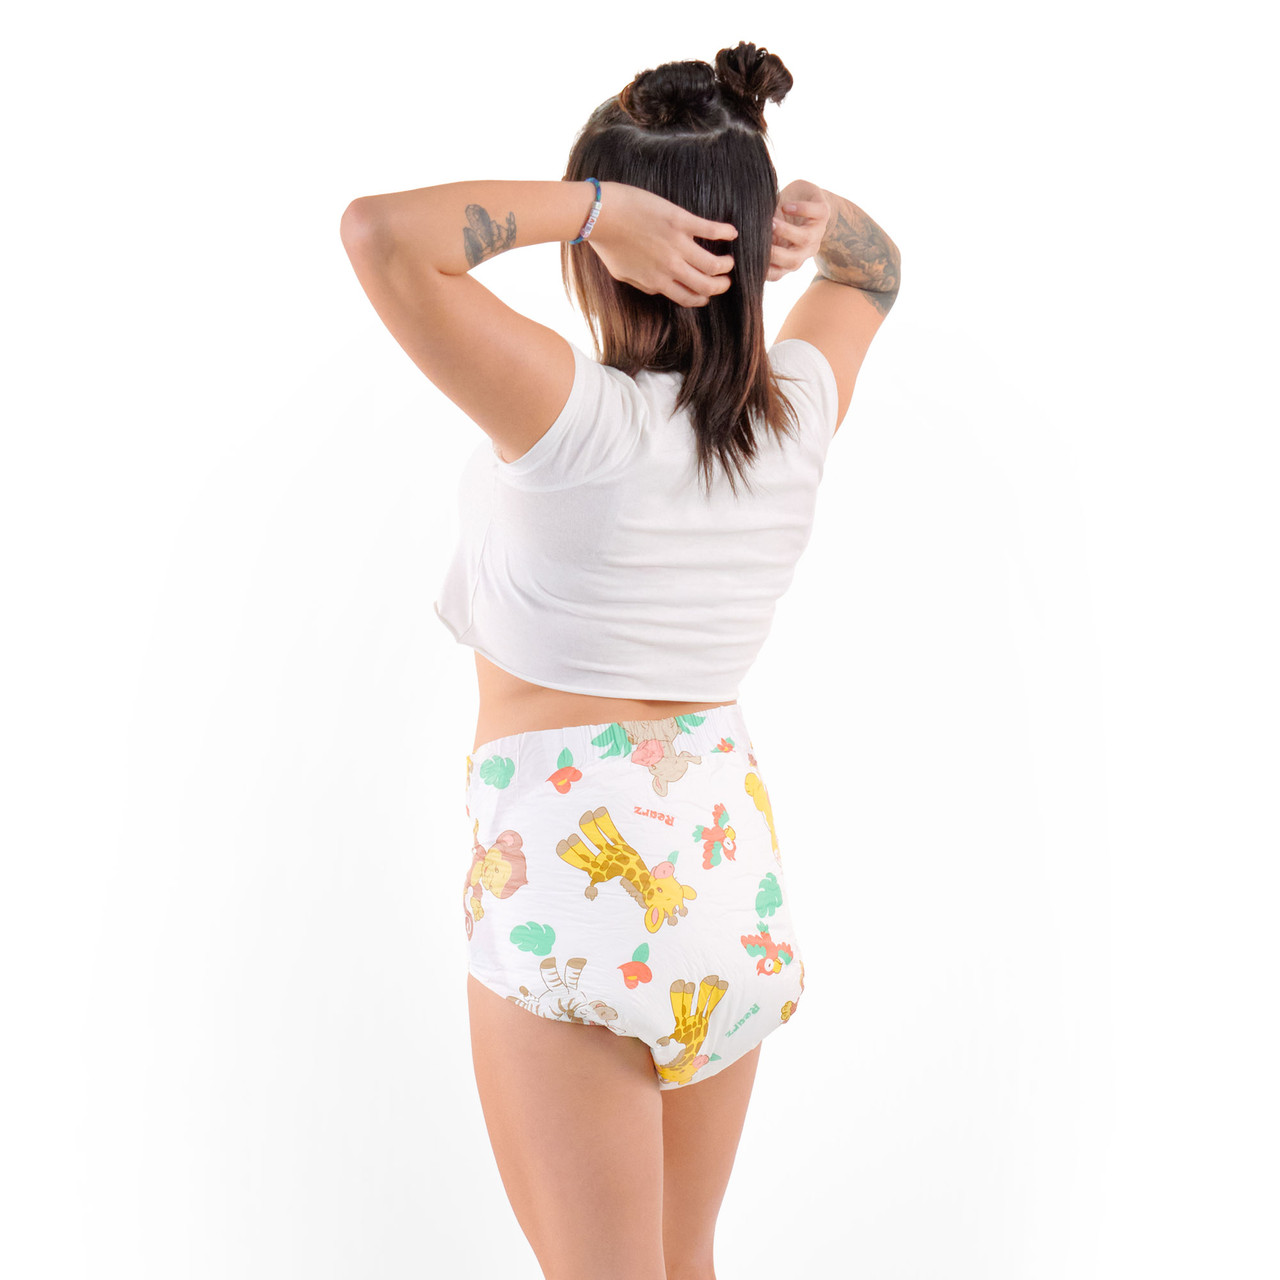 Buy A Variety of Adult Printed Diapers Online Canada